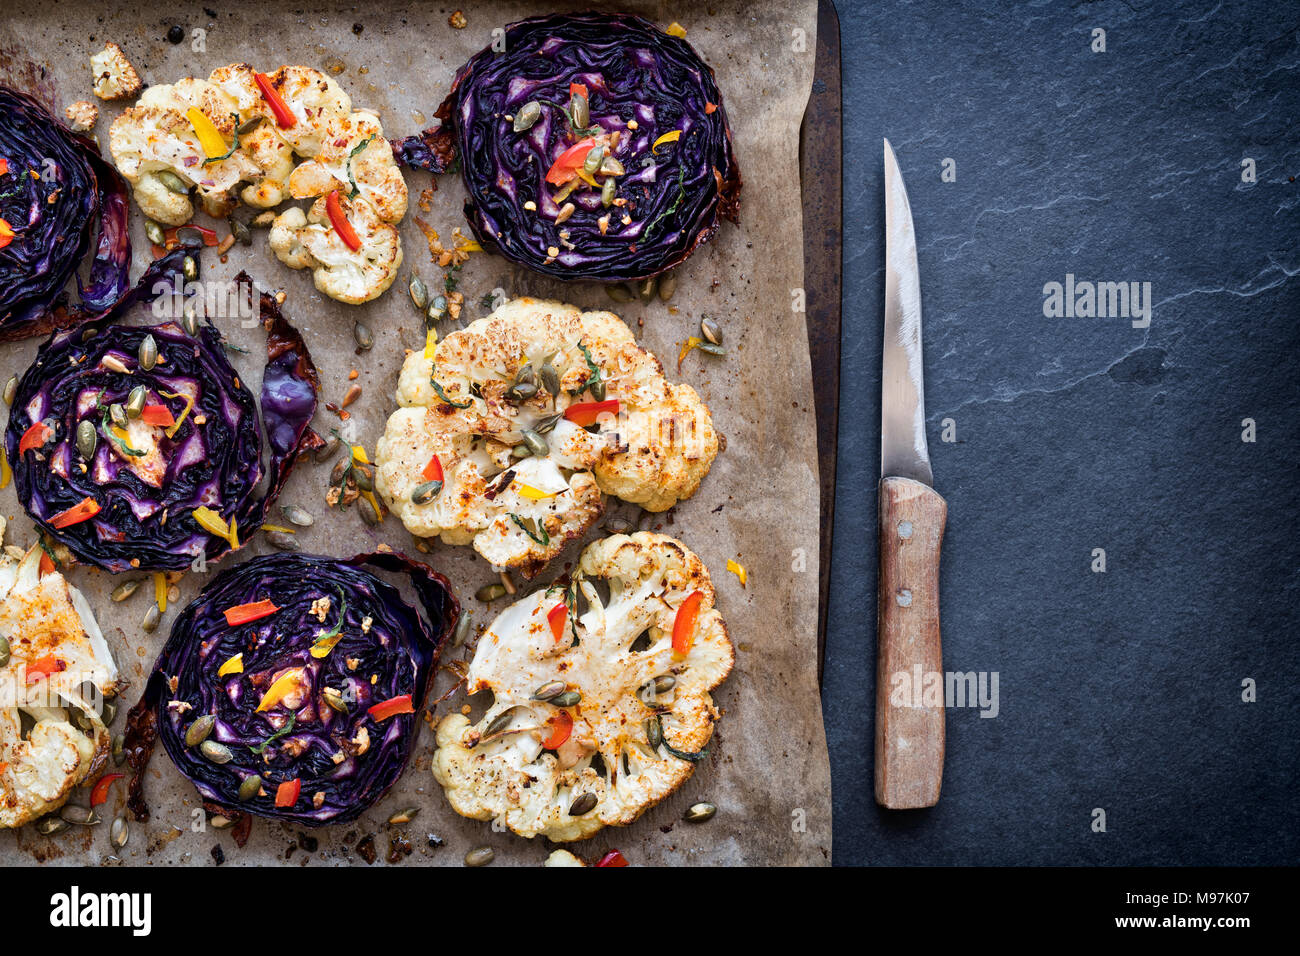 Roasted red cabbage and cauliflower steaks with seeds, chopped pepper, garlic, mint and spices. UK Stock Photo